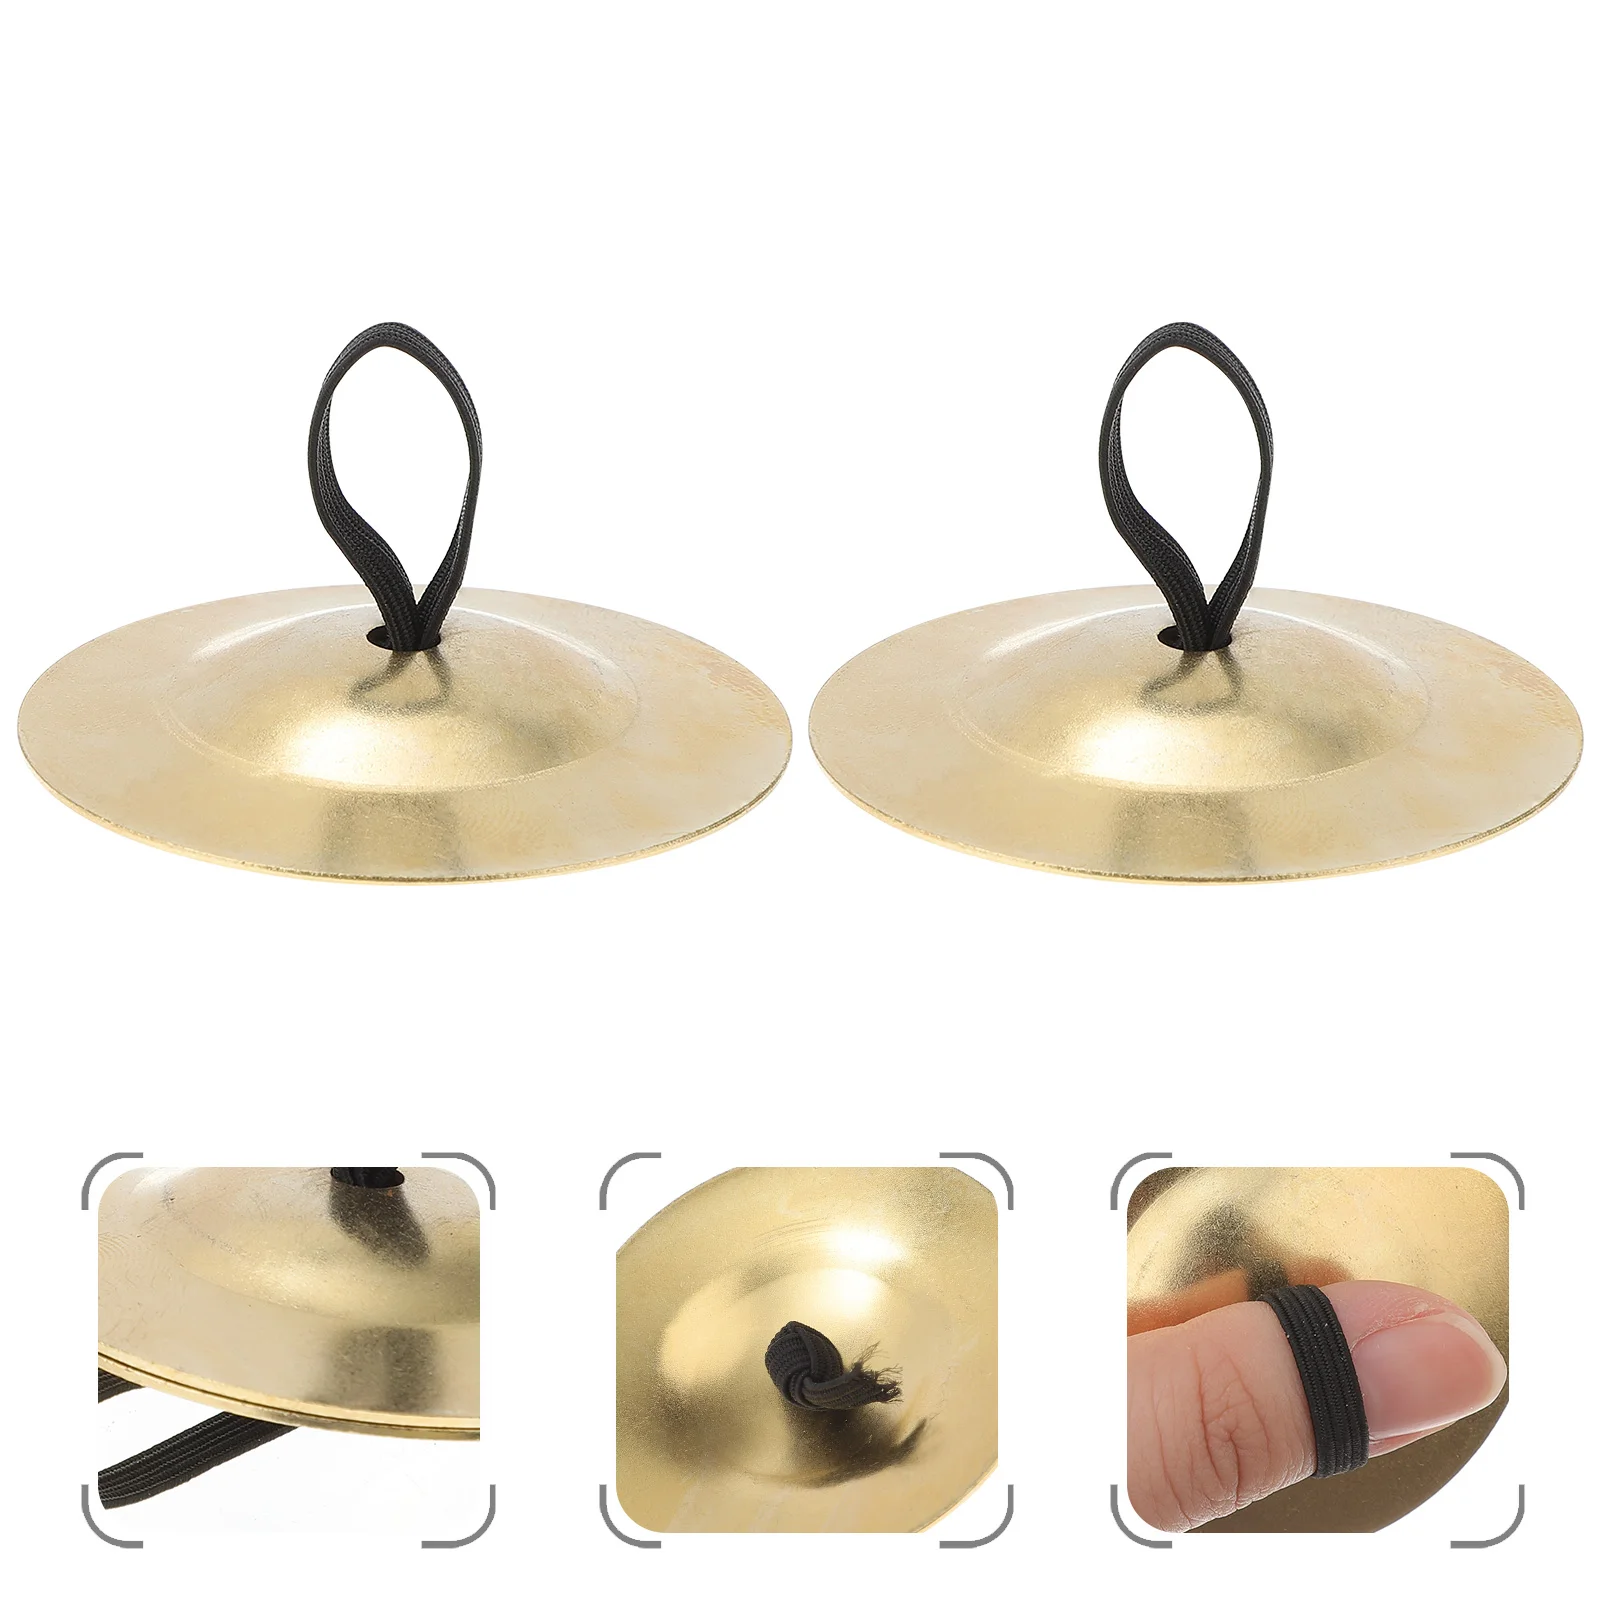 

Finger Cymbals Dance Cymbal Belly Zills Instrument Musical Percussion Toys Brass Kids Dancing Noise Rhythm Party Dancer